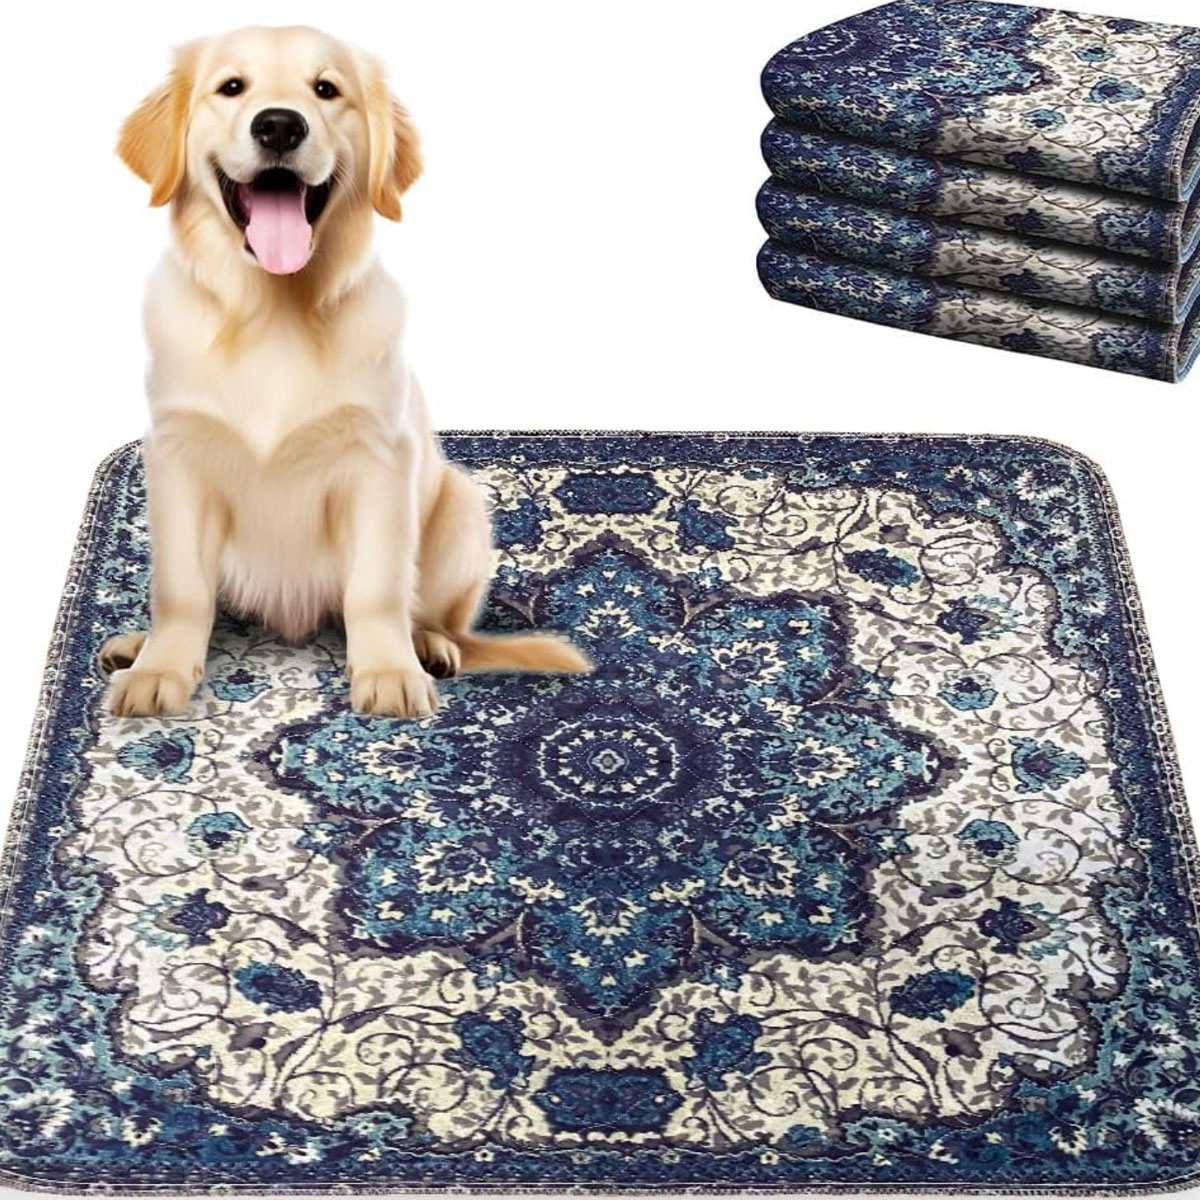 https://akns-images.eonline.com/eol_images/Entire_Site/2023626/rs_1200x1200-230726140815-dog-rug1200-.jpg?fit=around%7C1080:1080&output-quality=90&crop=1080:1080;center,top